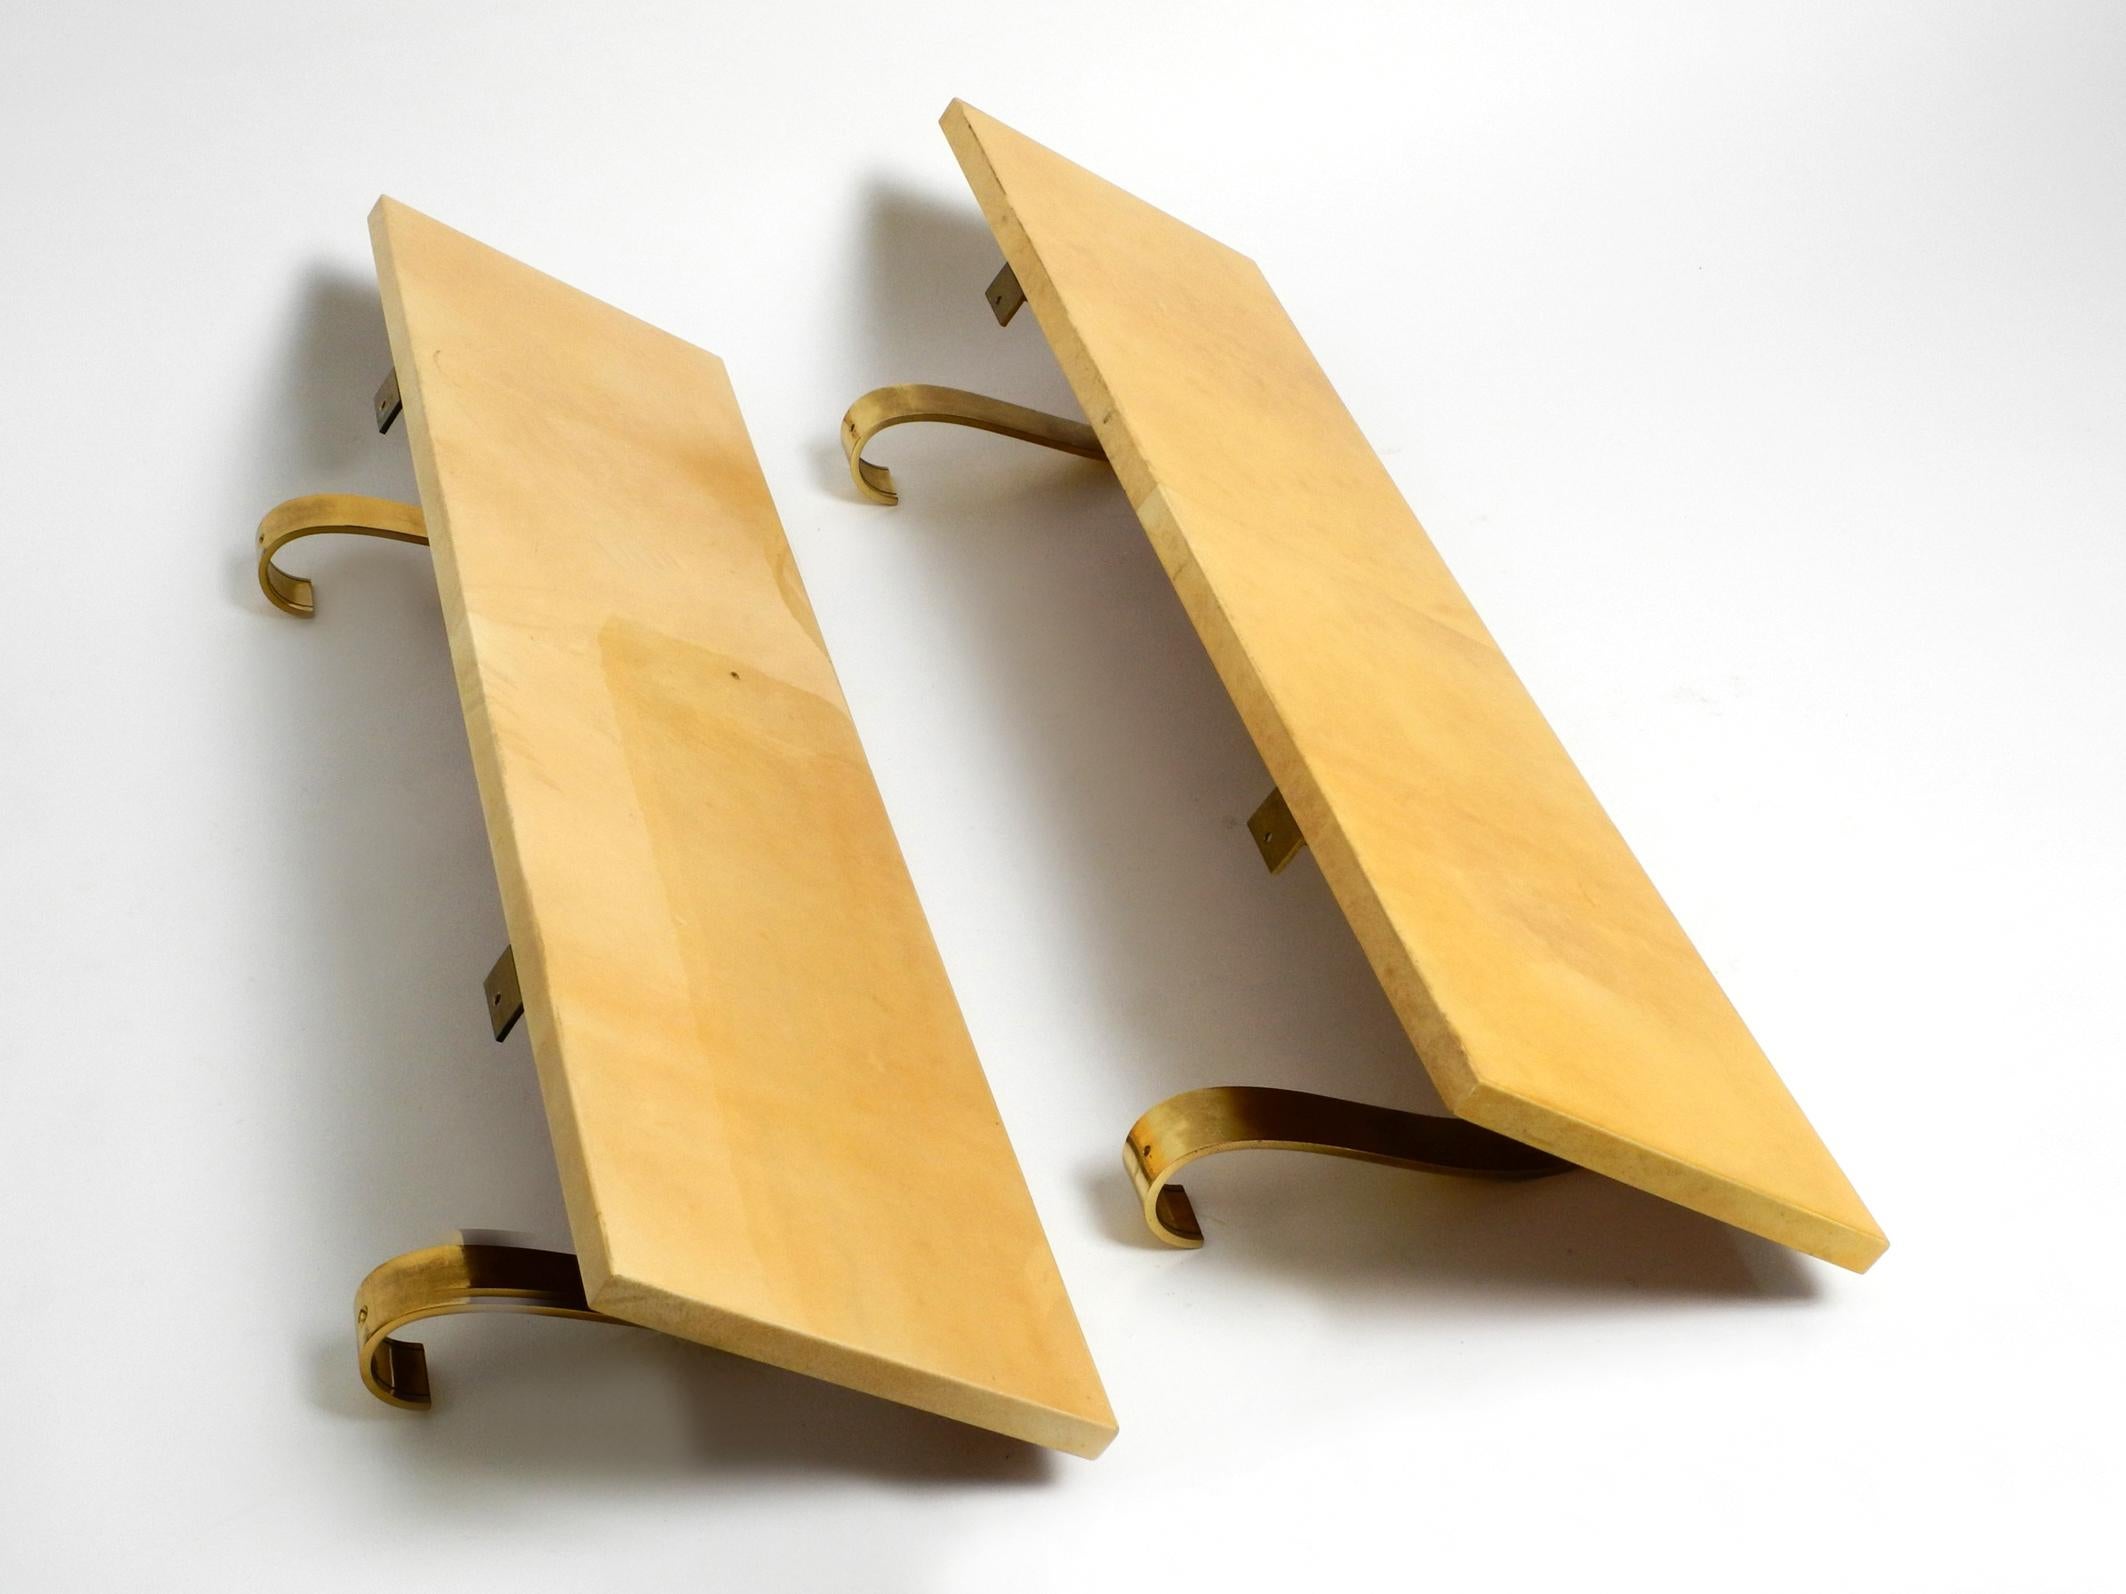 Two Beautiful, Very Rare 1960s Large Aldo Tura Shelves Made of Wood and Goatskin For Sale 4